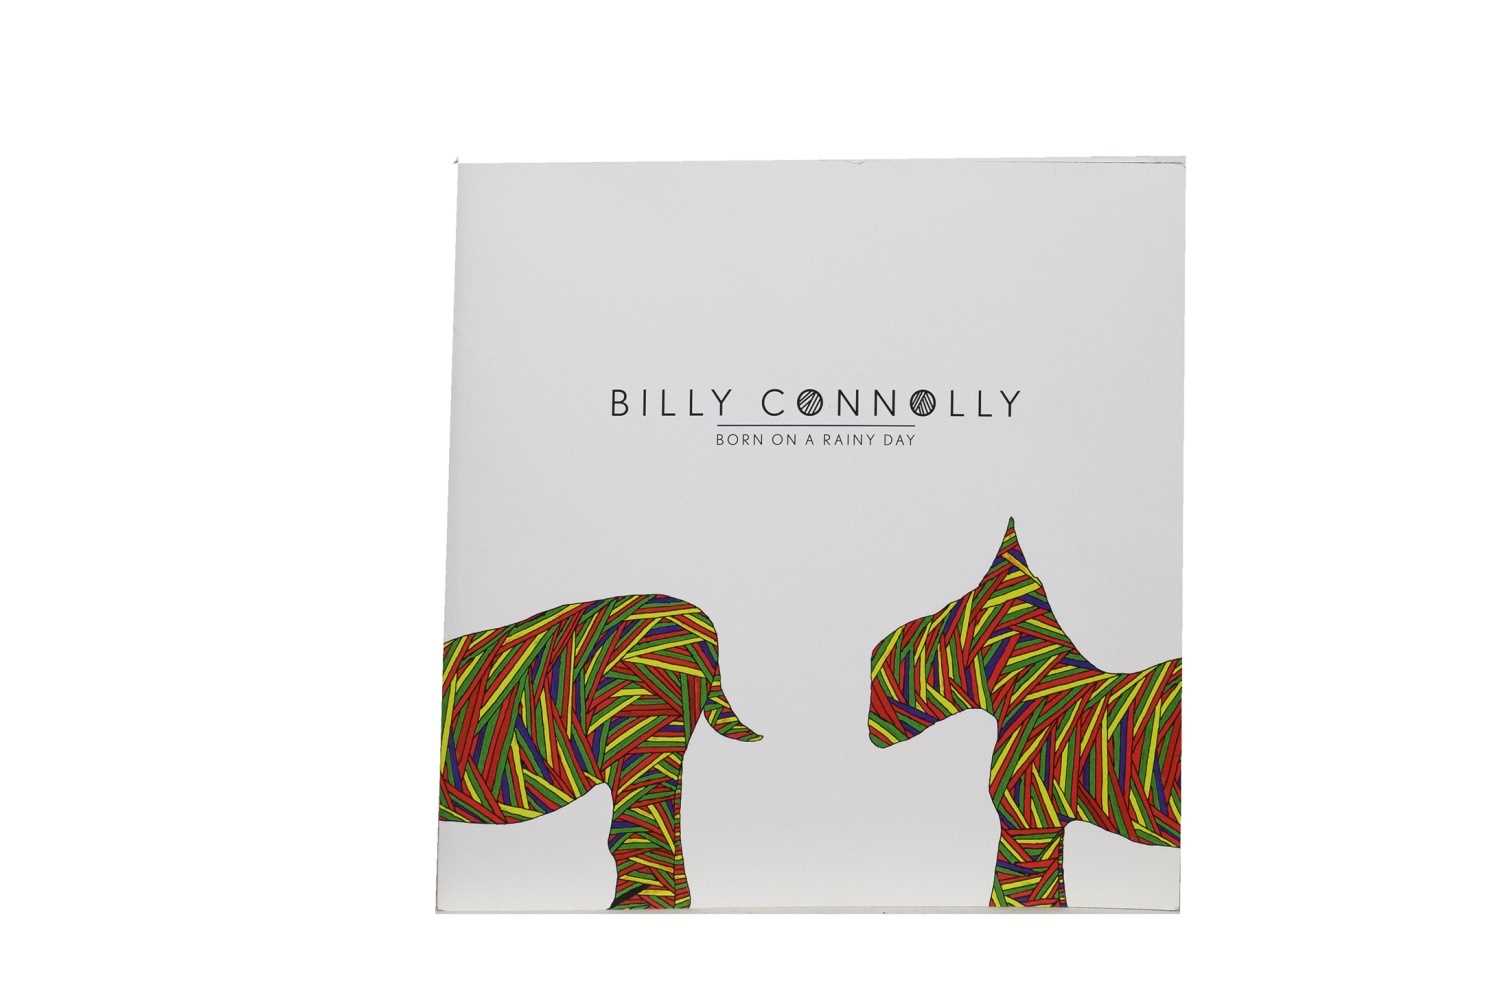 SET OF SIX SIGNED PRINTS FROM 'BORN ON A RAINY DAY' SERIES BY BILLY CONNOLLY